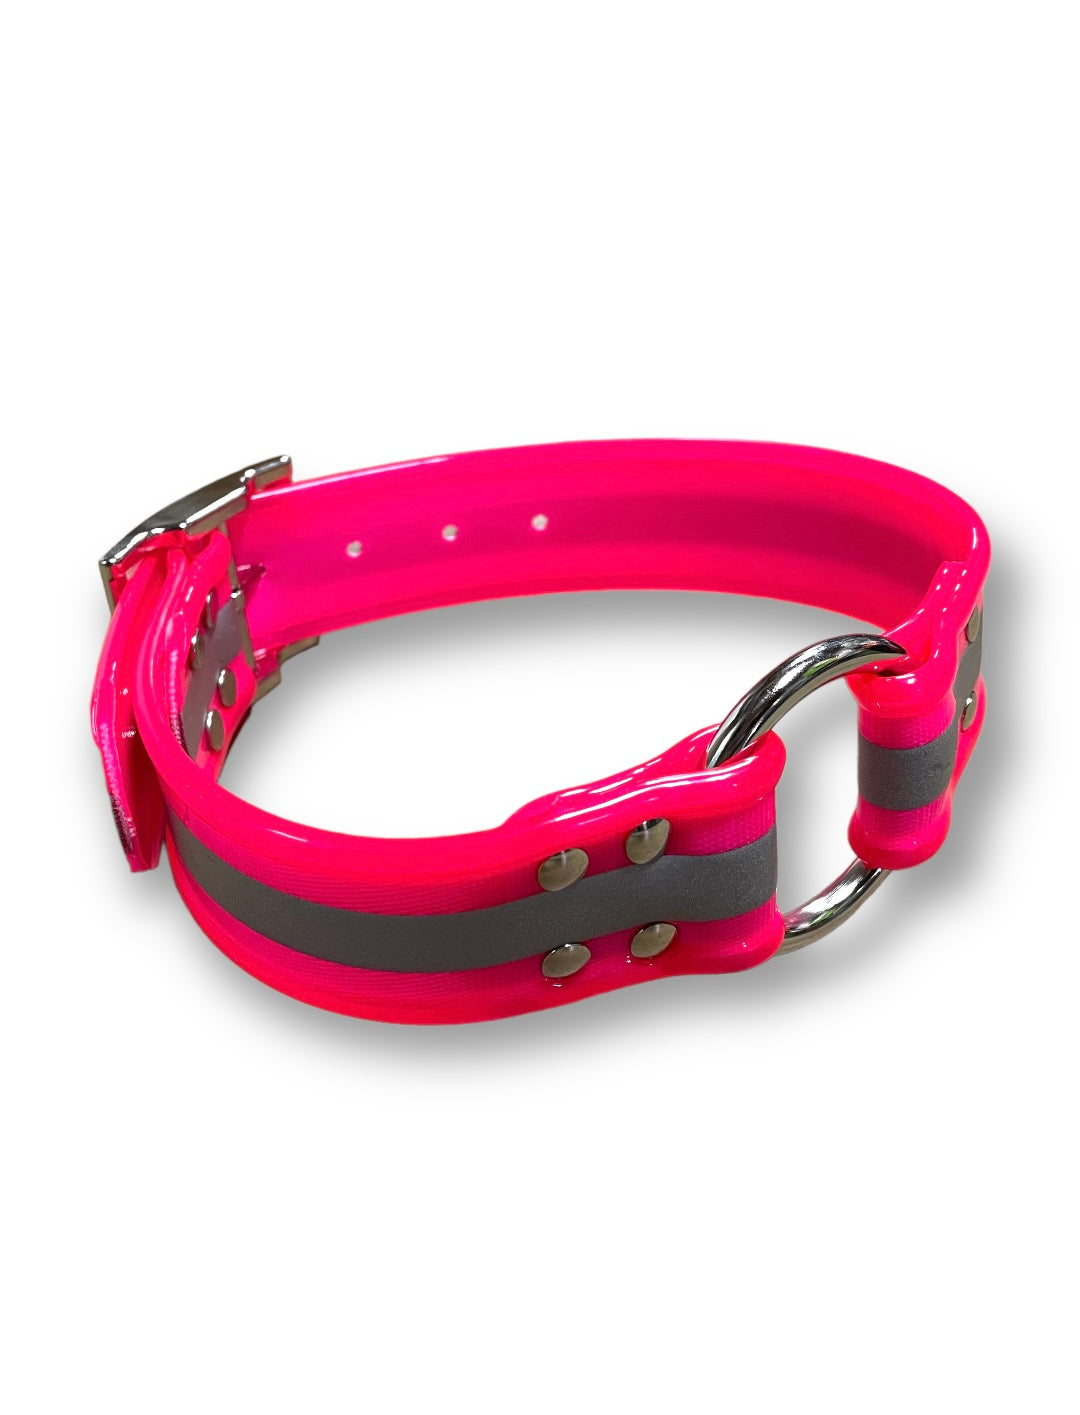 Reflective Day Glo Dog Collars with Center Ring - 1.5 Wide